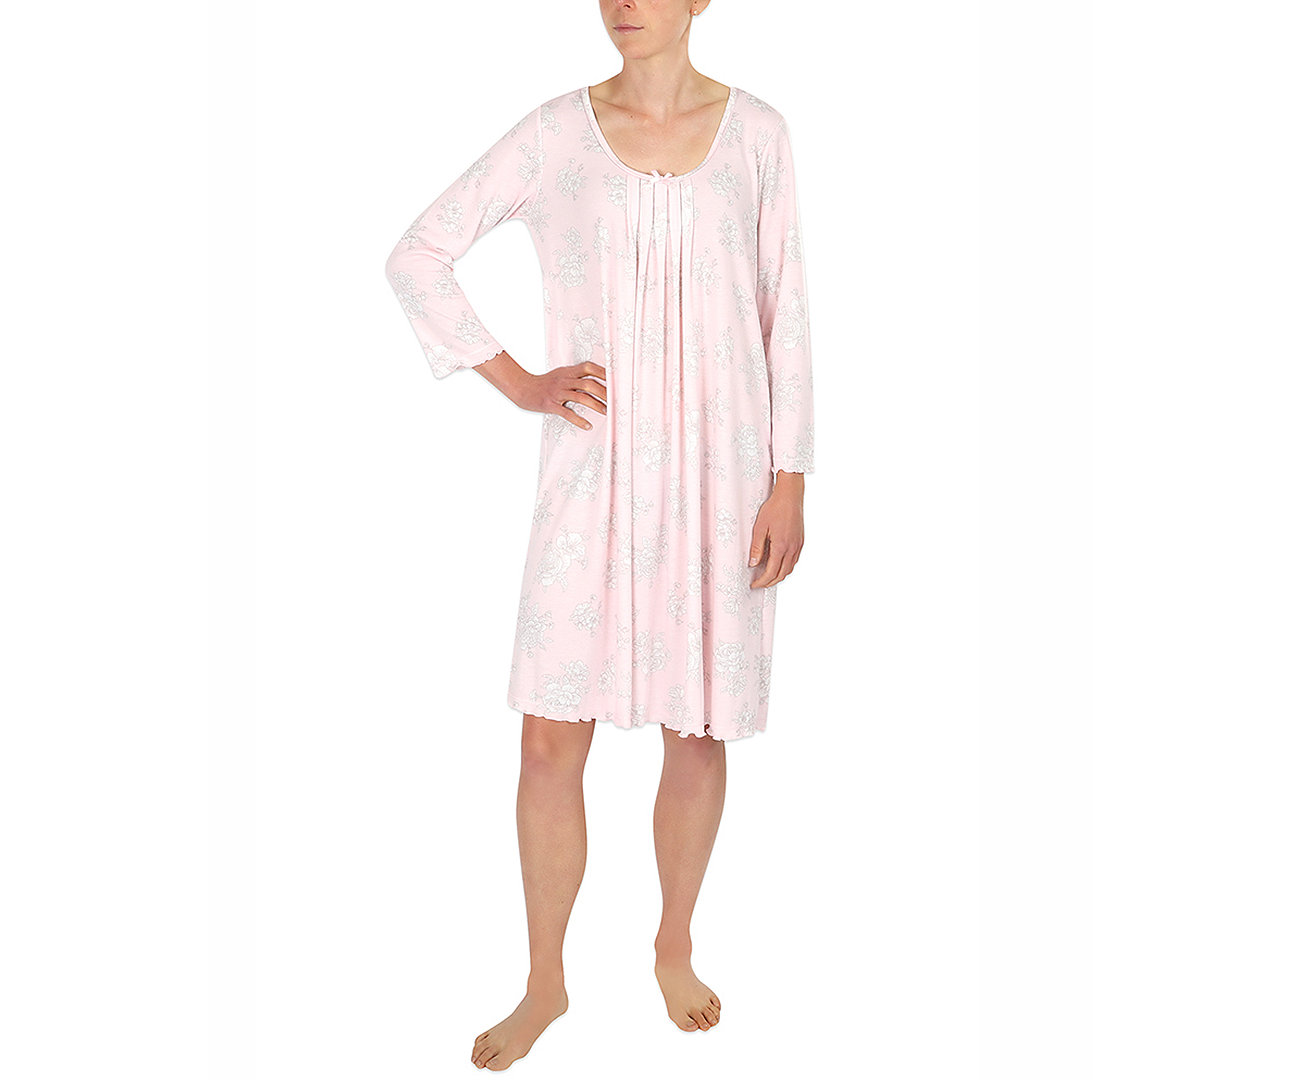 Etched Floral Short Knit Nightgown Miss Elaine